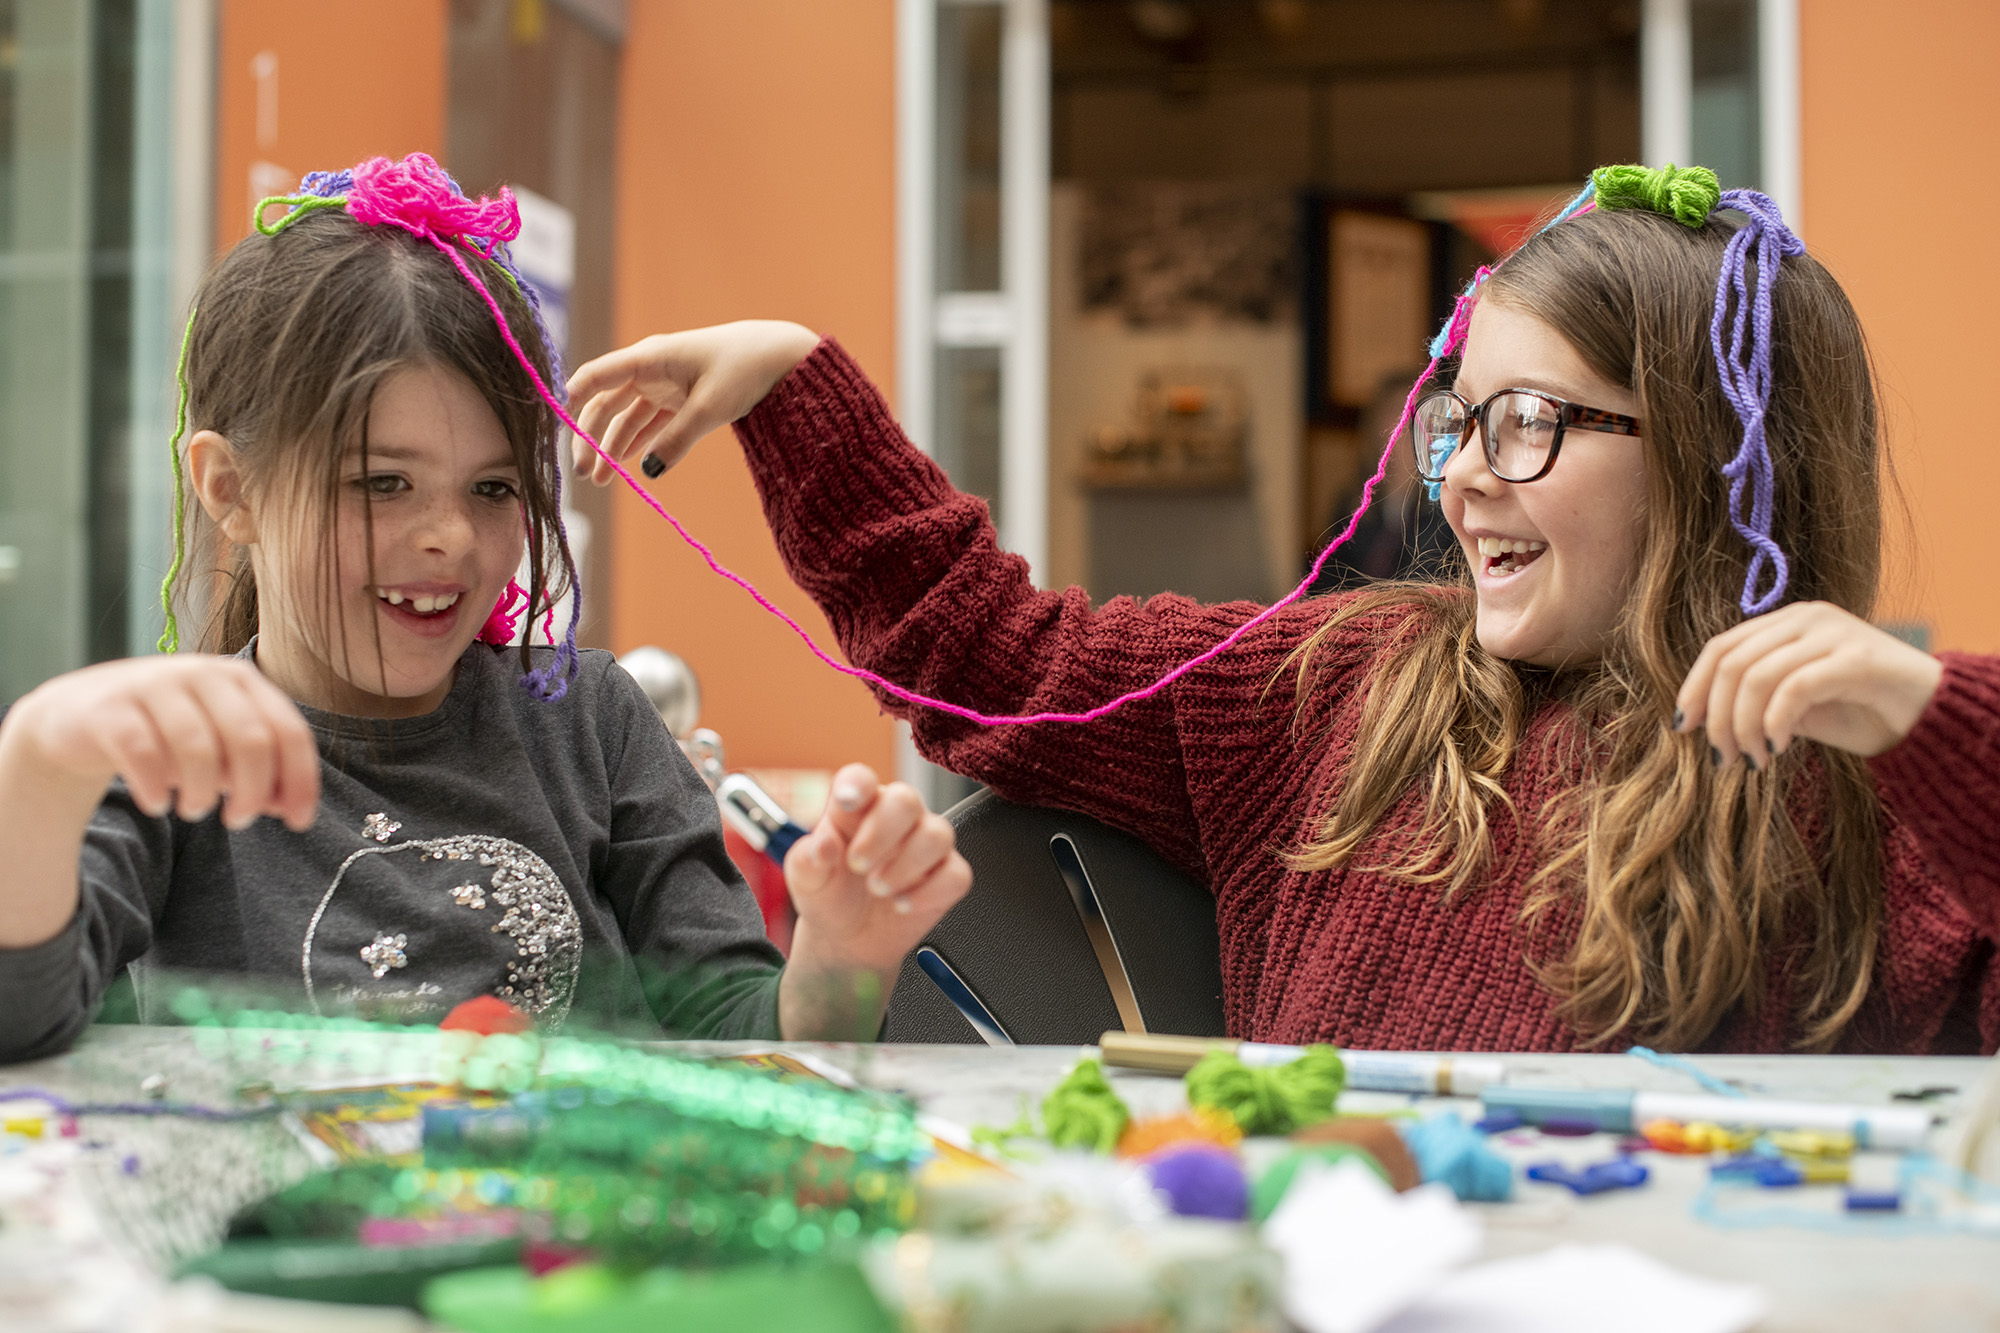 Two girls sitting at a craft table, playing with coloured yarn that is stretched across their heads